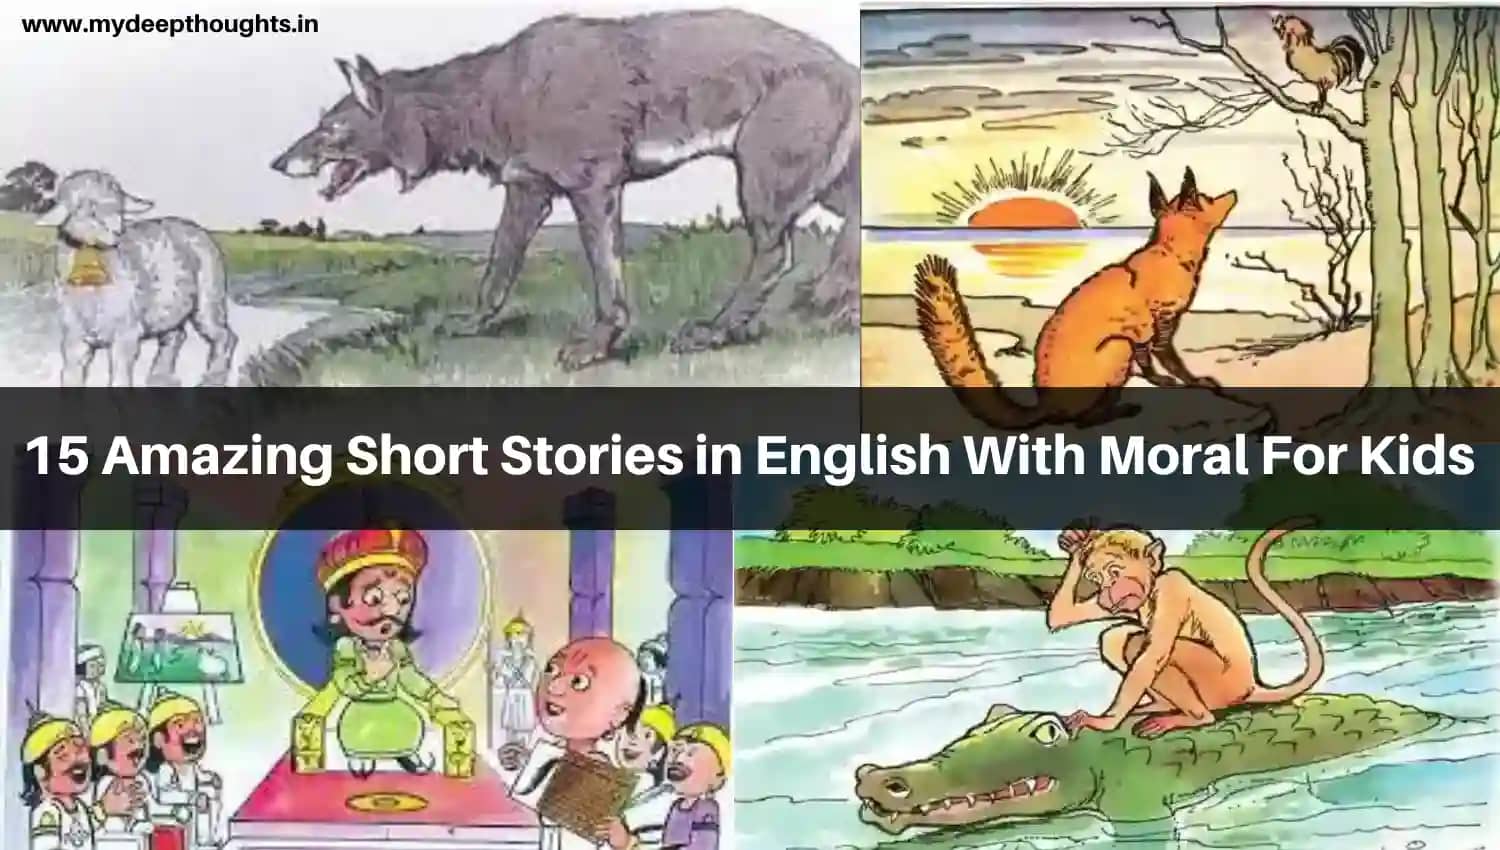 15 Amazing Short Stories in English With Moral For Kids